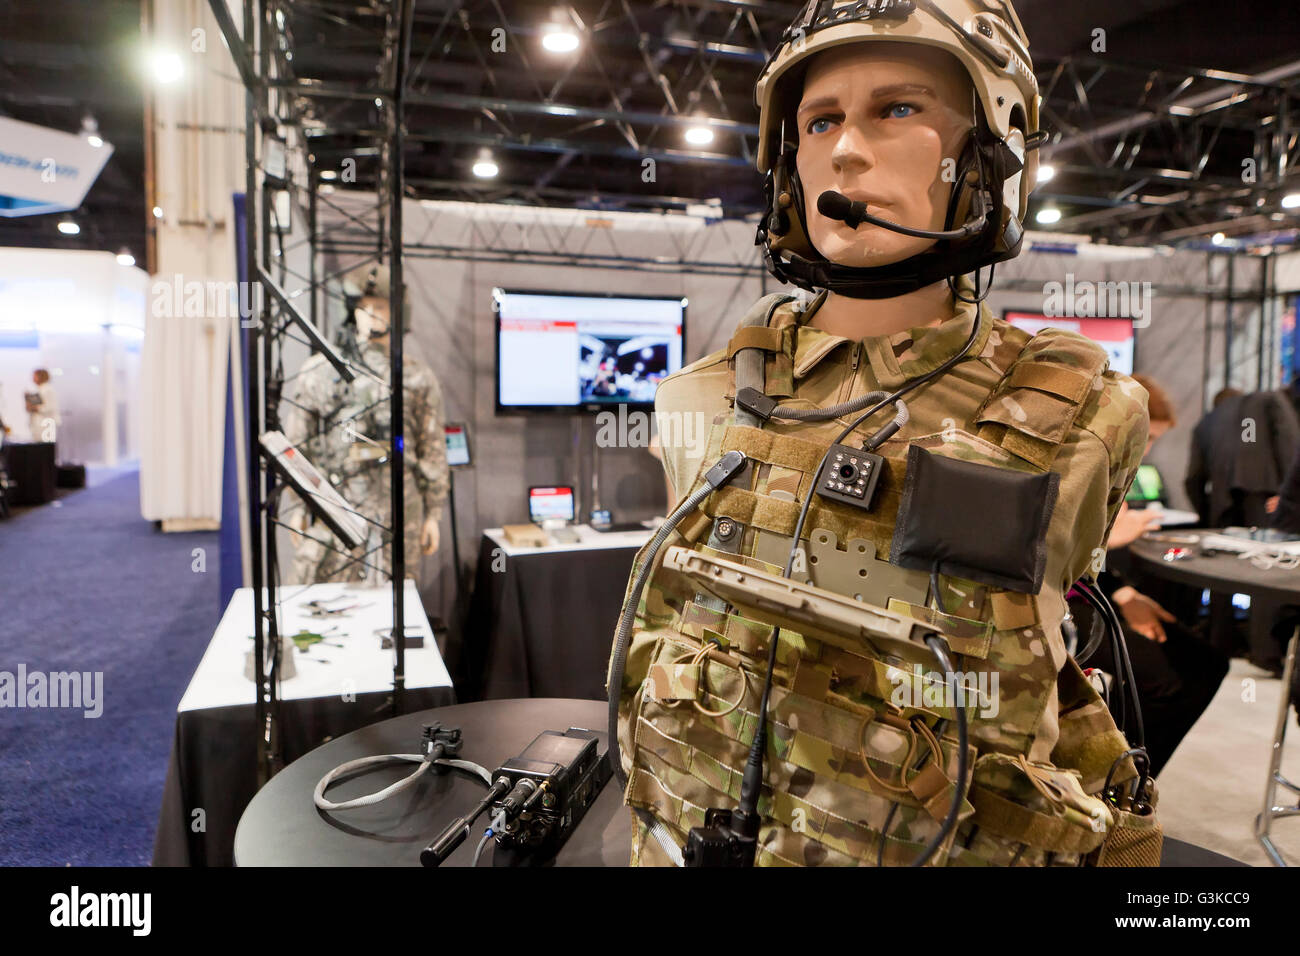 US military integrated soldier system communications vest and helmet at expo - USA Stock Photo